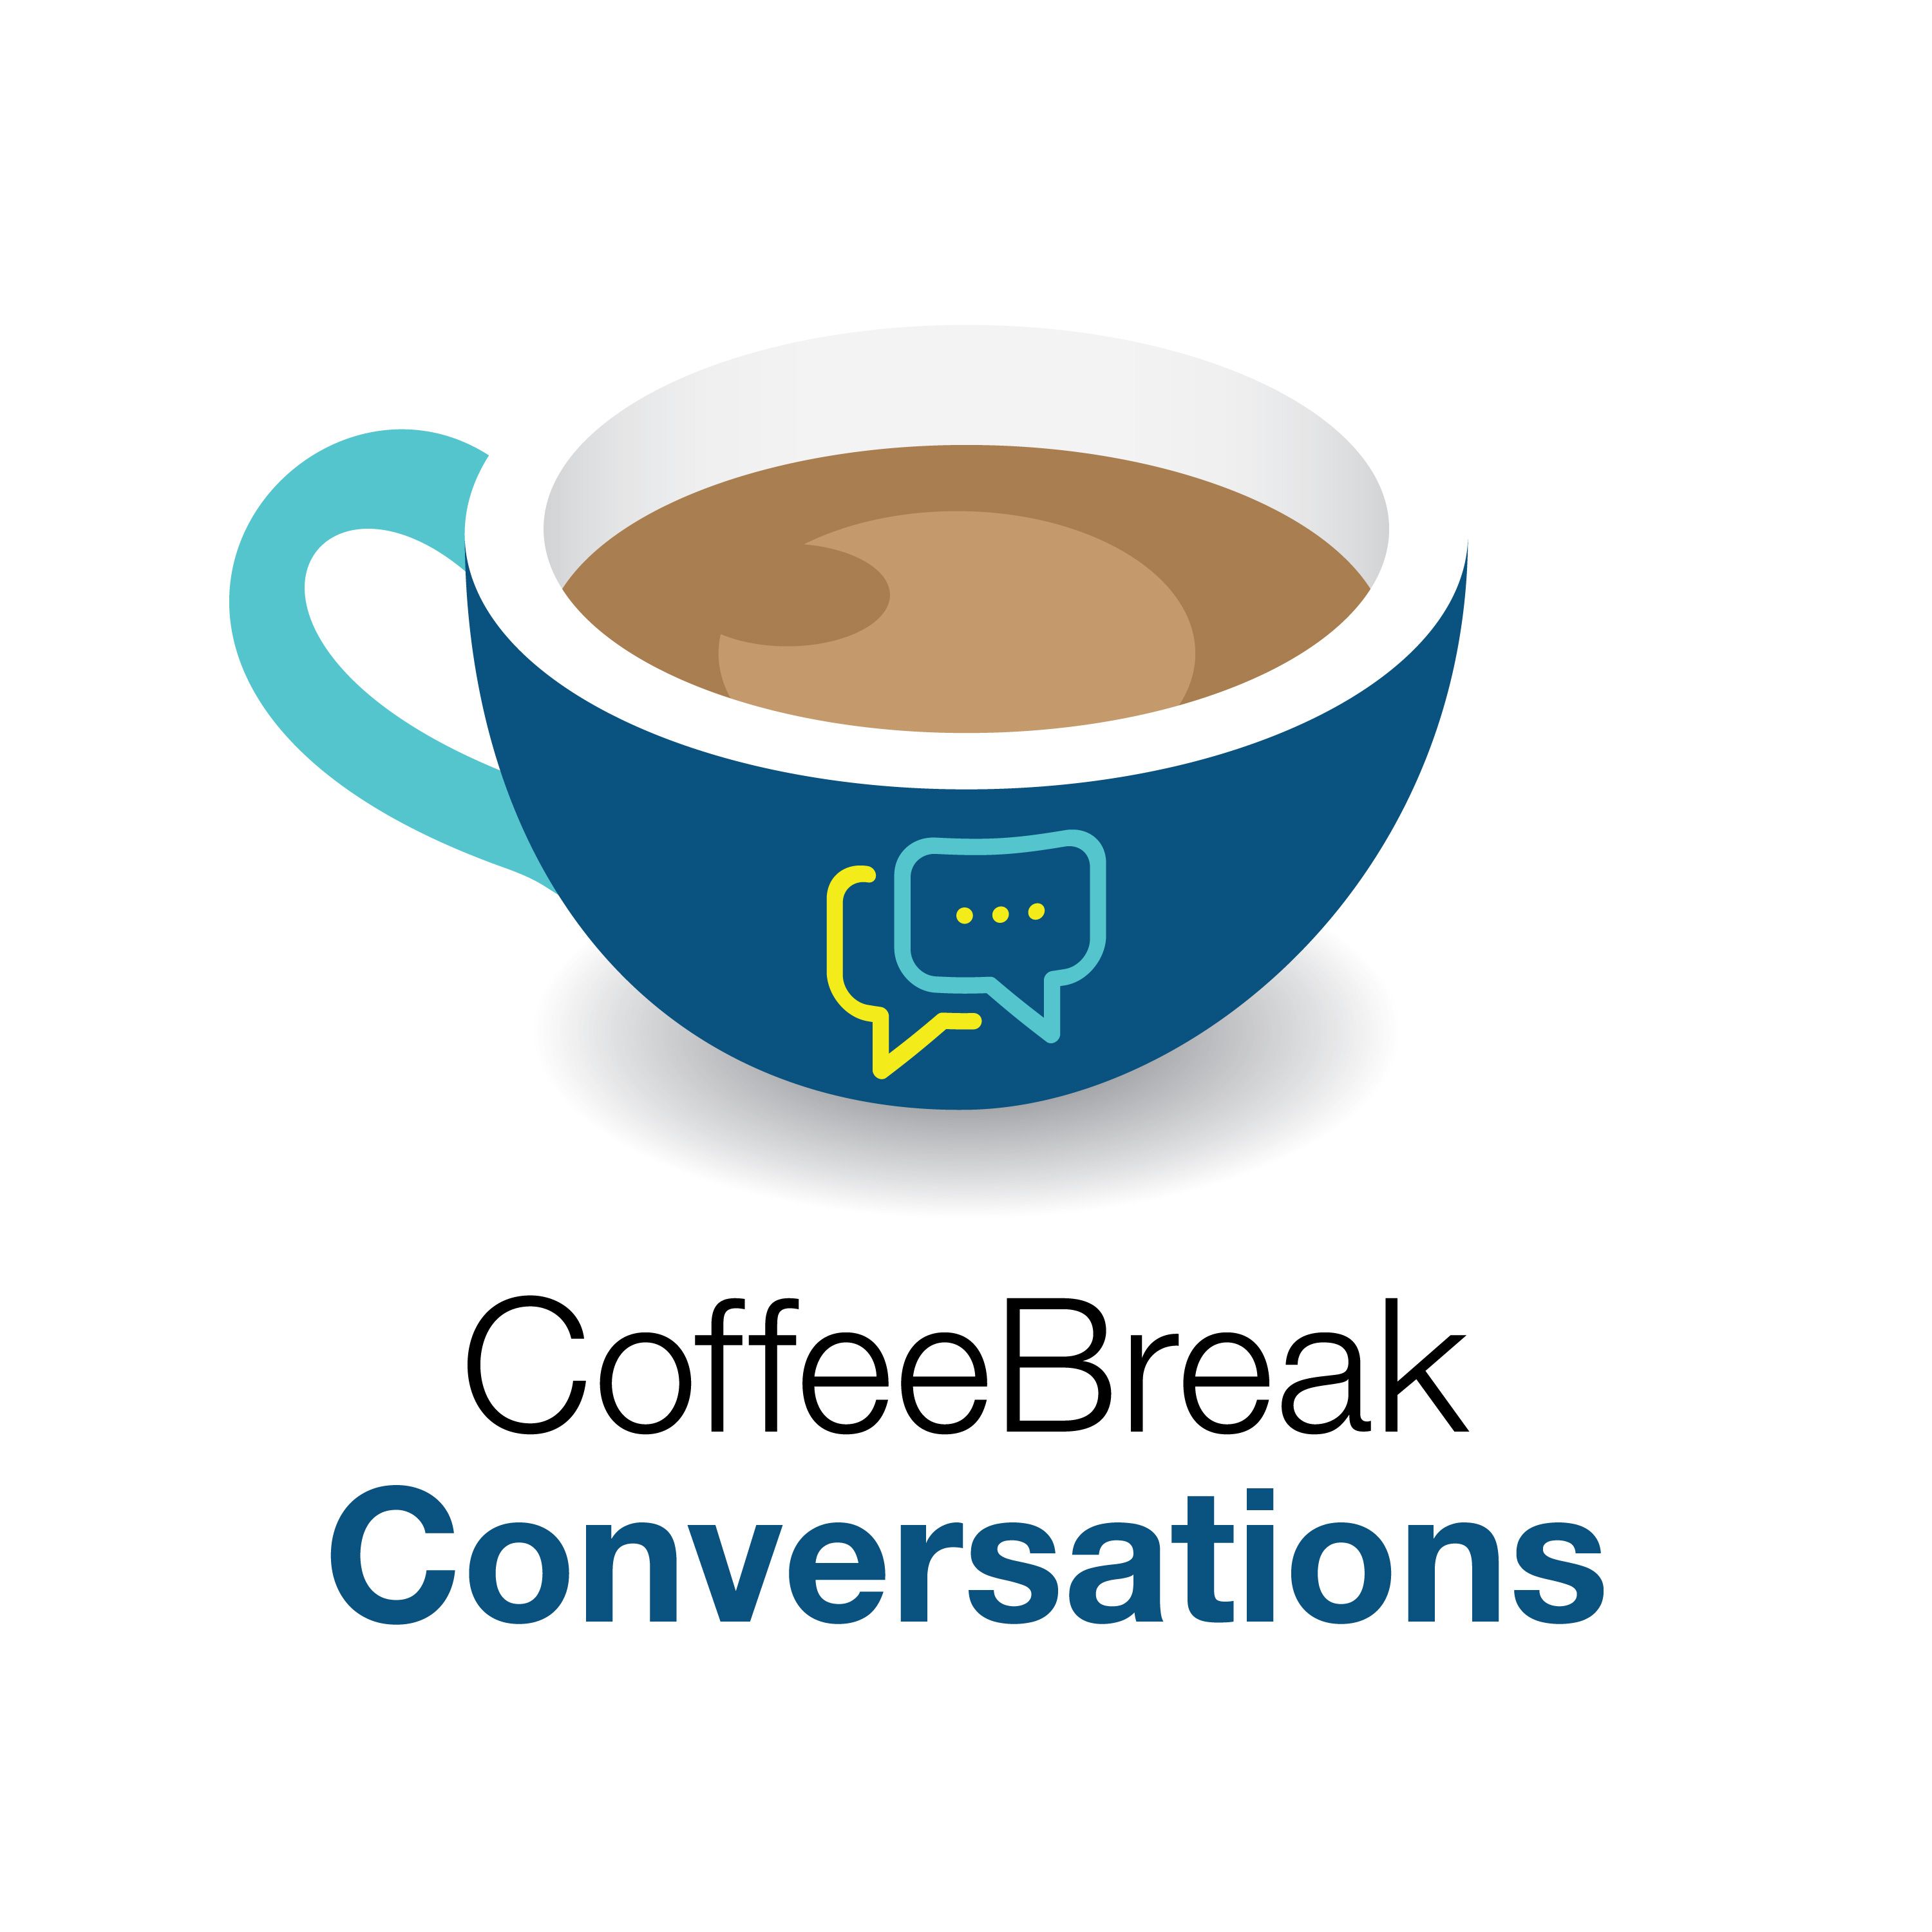 A Coffee Break Conversation with French learner Stephen